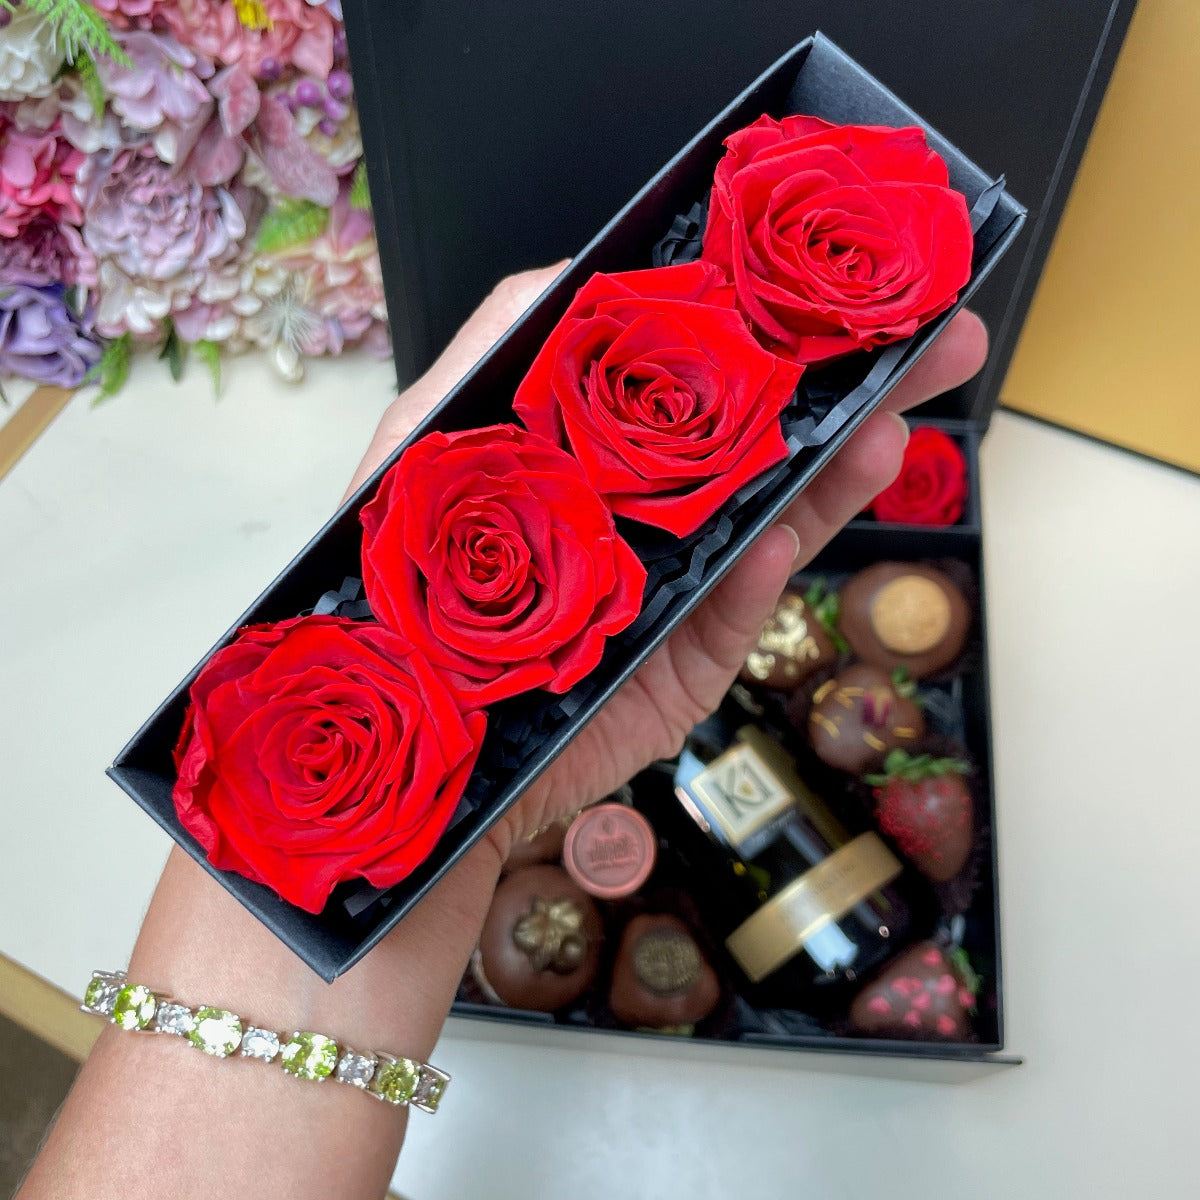 preserved Roses, Infinity Roses, Eternal Roses, Chocolate Strawberries Box, K1 Sparkling, Same day Delivery Gift Hamper, Chocolate Flowers Gift, Valentine's Day Chocolate box, Valentine Gift for Her, Long lasting flowers.